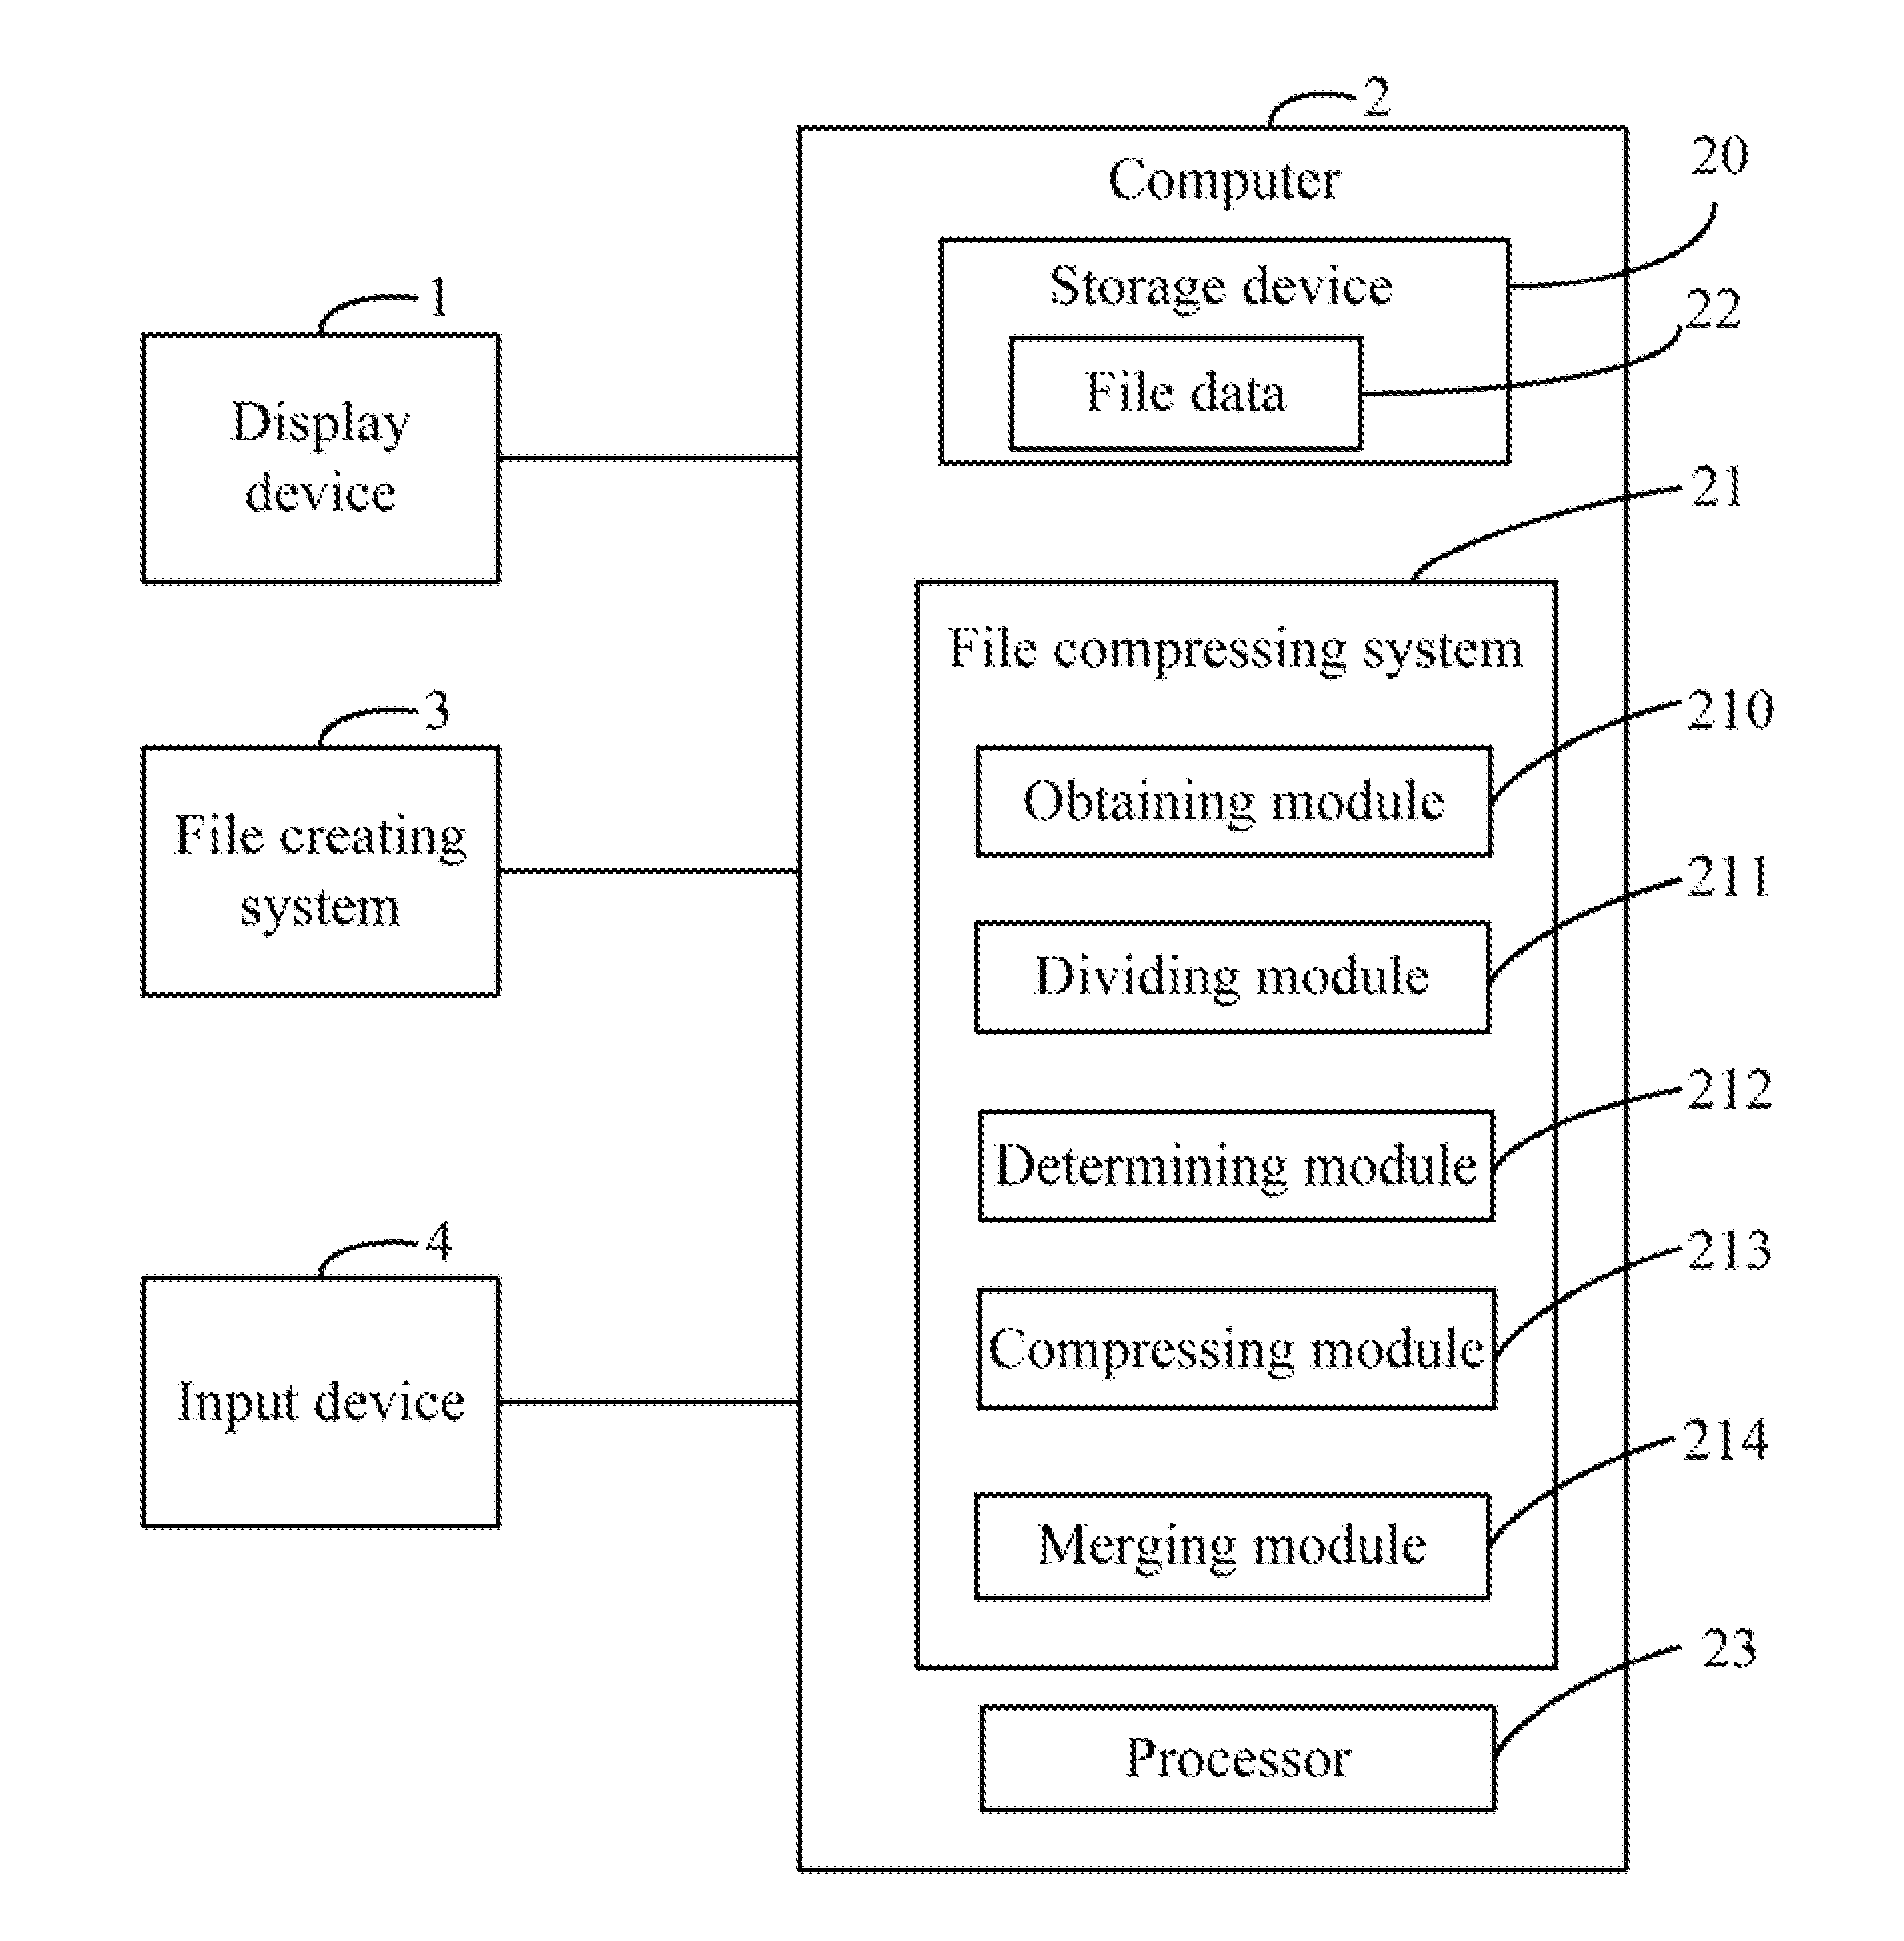 System and method for compressing files